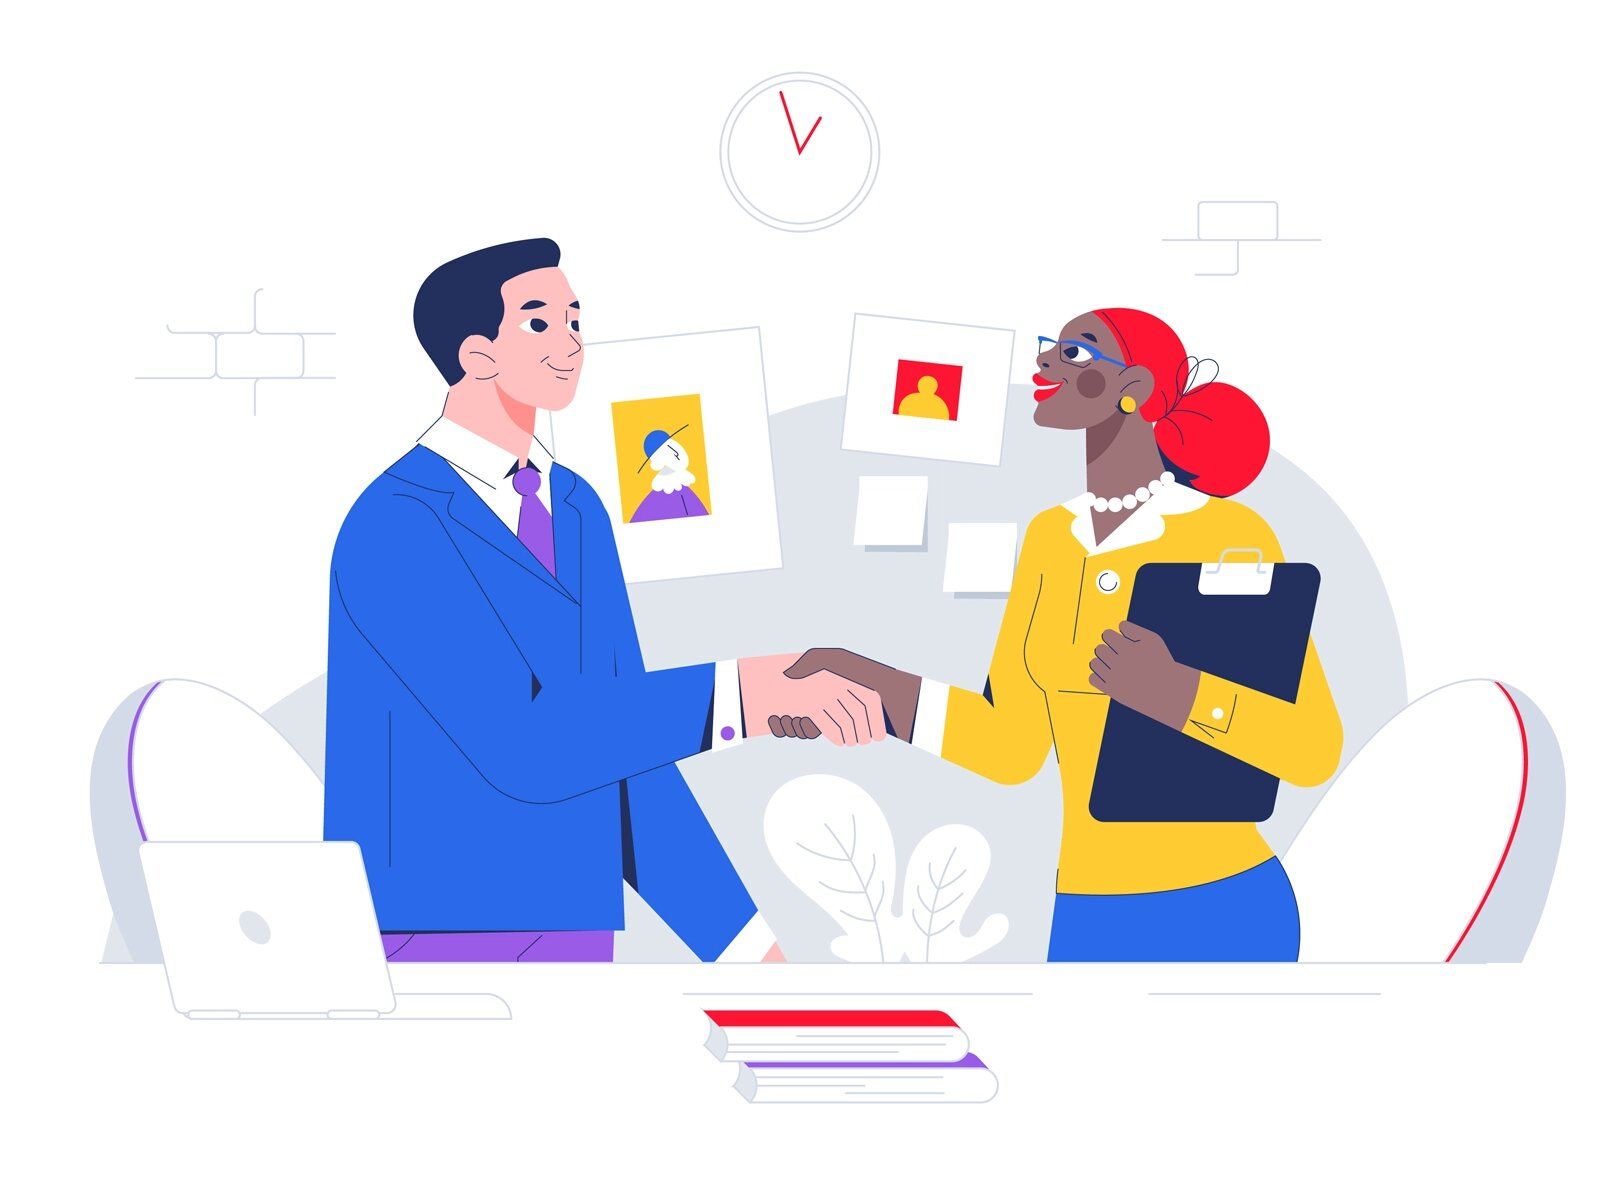 Finding the right partner takes quite a lot of time but is definitely worth it! (*image by [Teo Bichinashvili](https://dribbble.com/teobichinashvili){ rel="nofollow" target="_blank" .default-md}*)